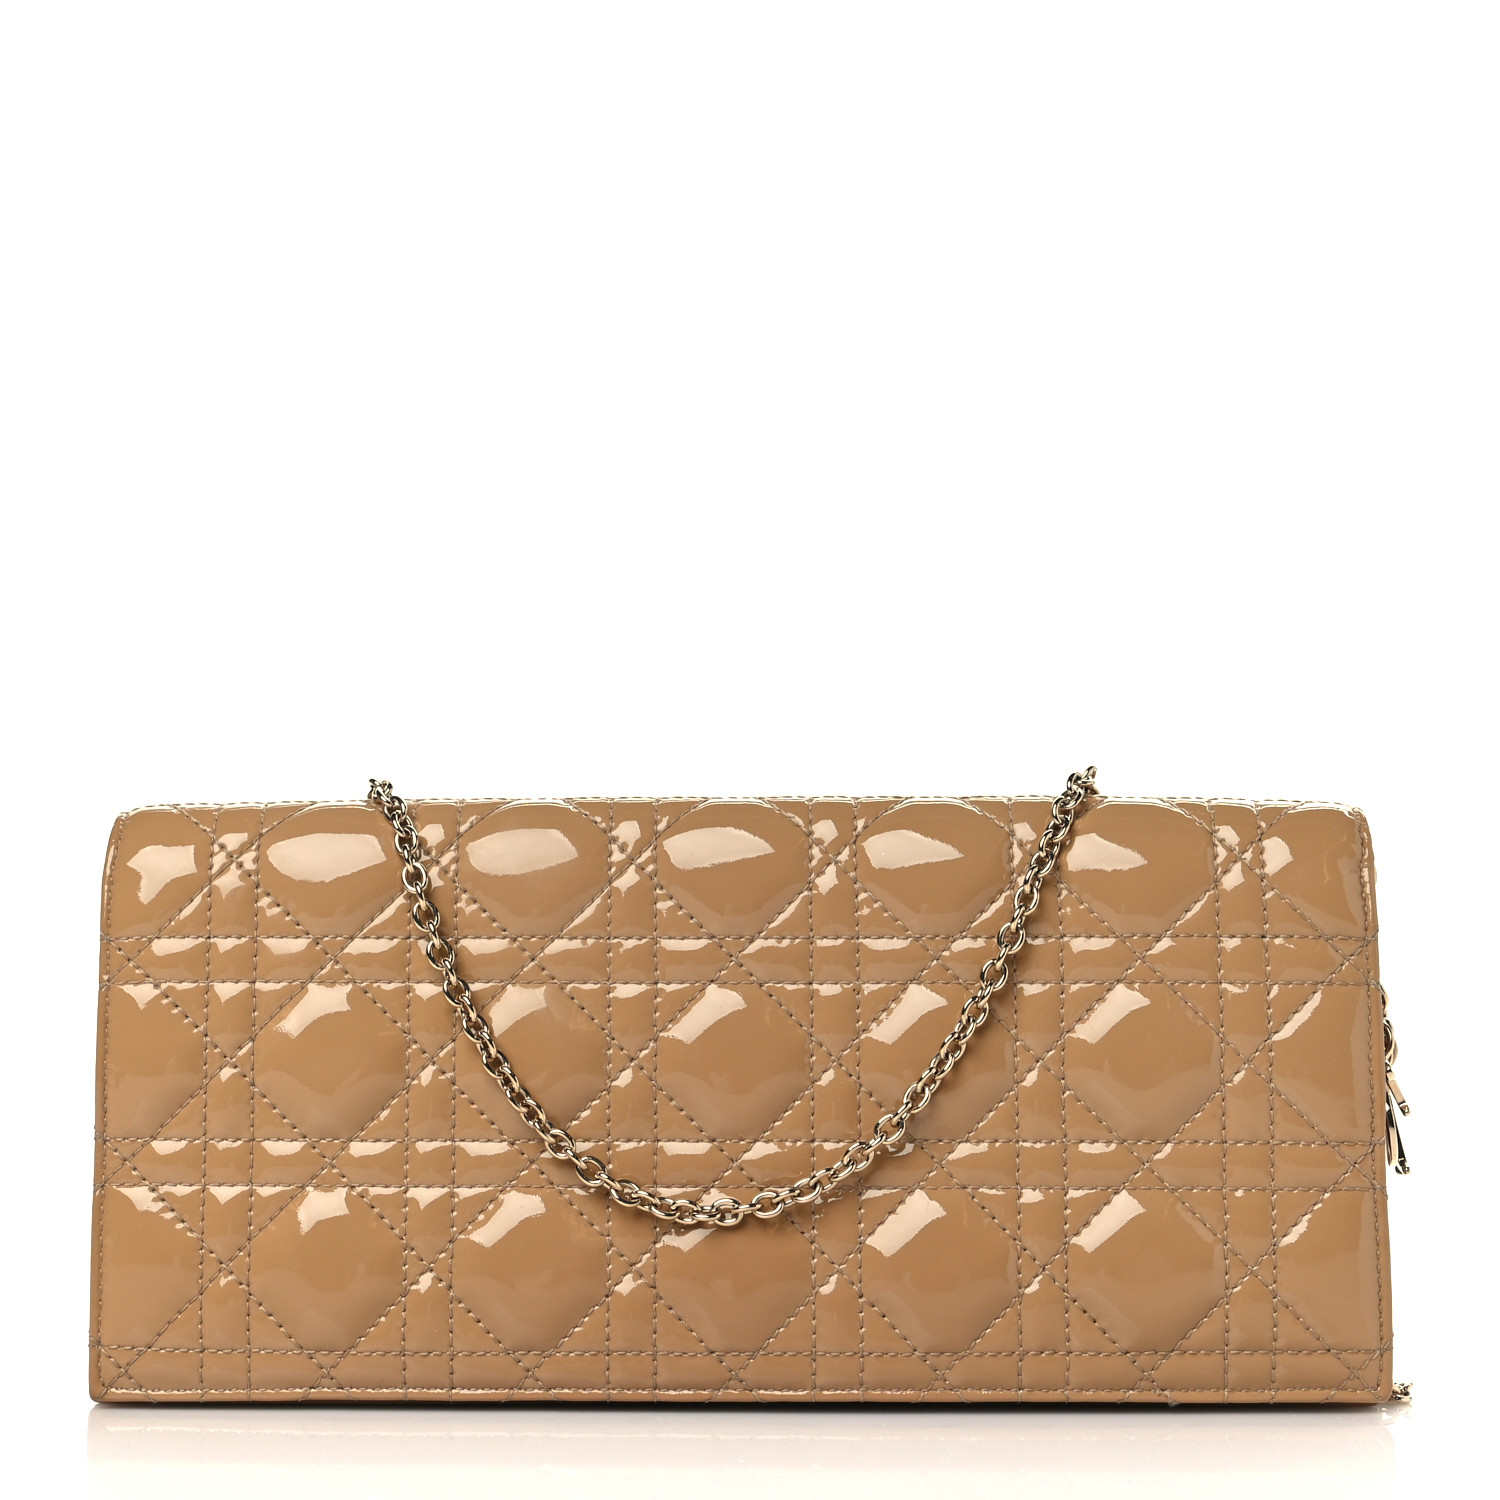 CHRISTIAN DIOR Patent Cannage Lady Dior Convertible Clutch Beige